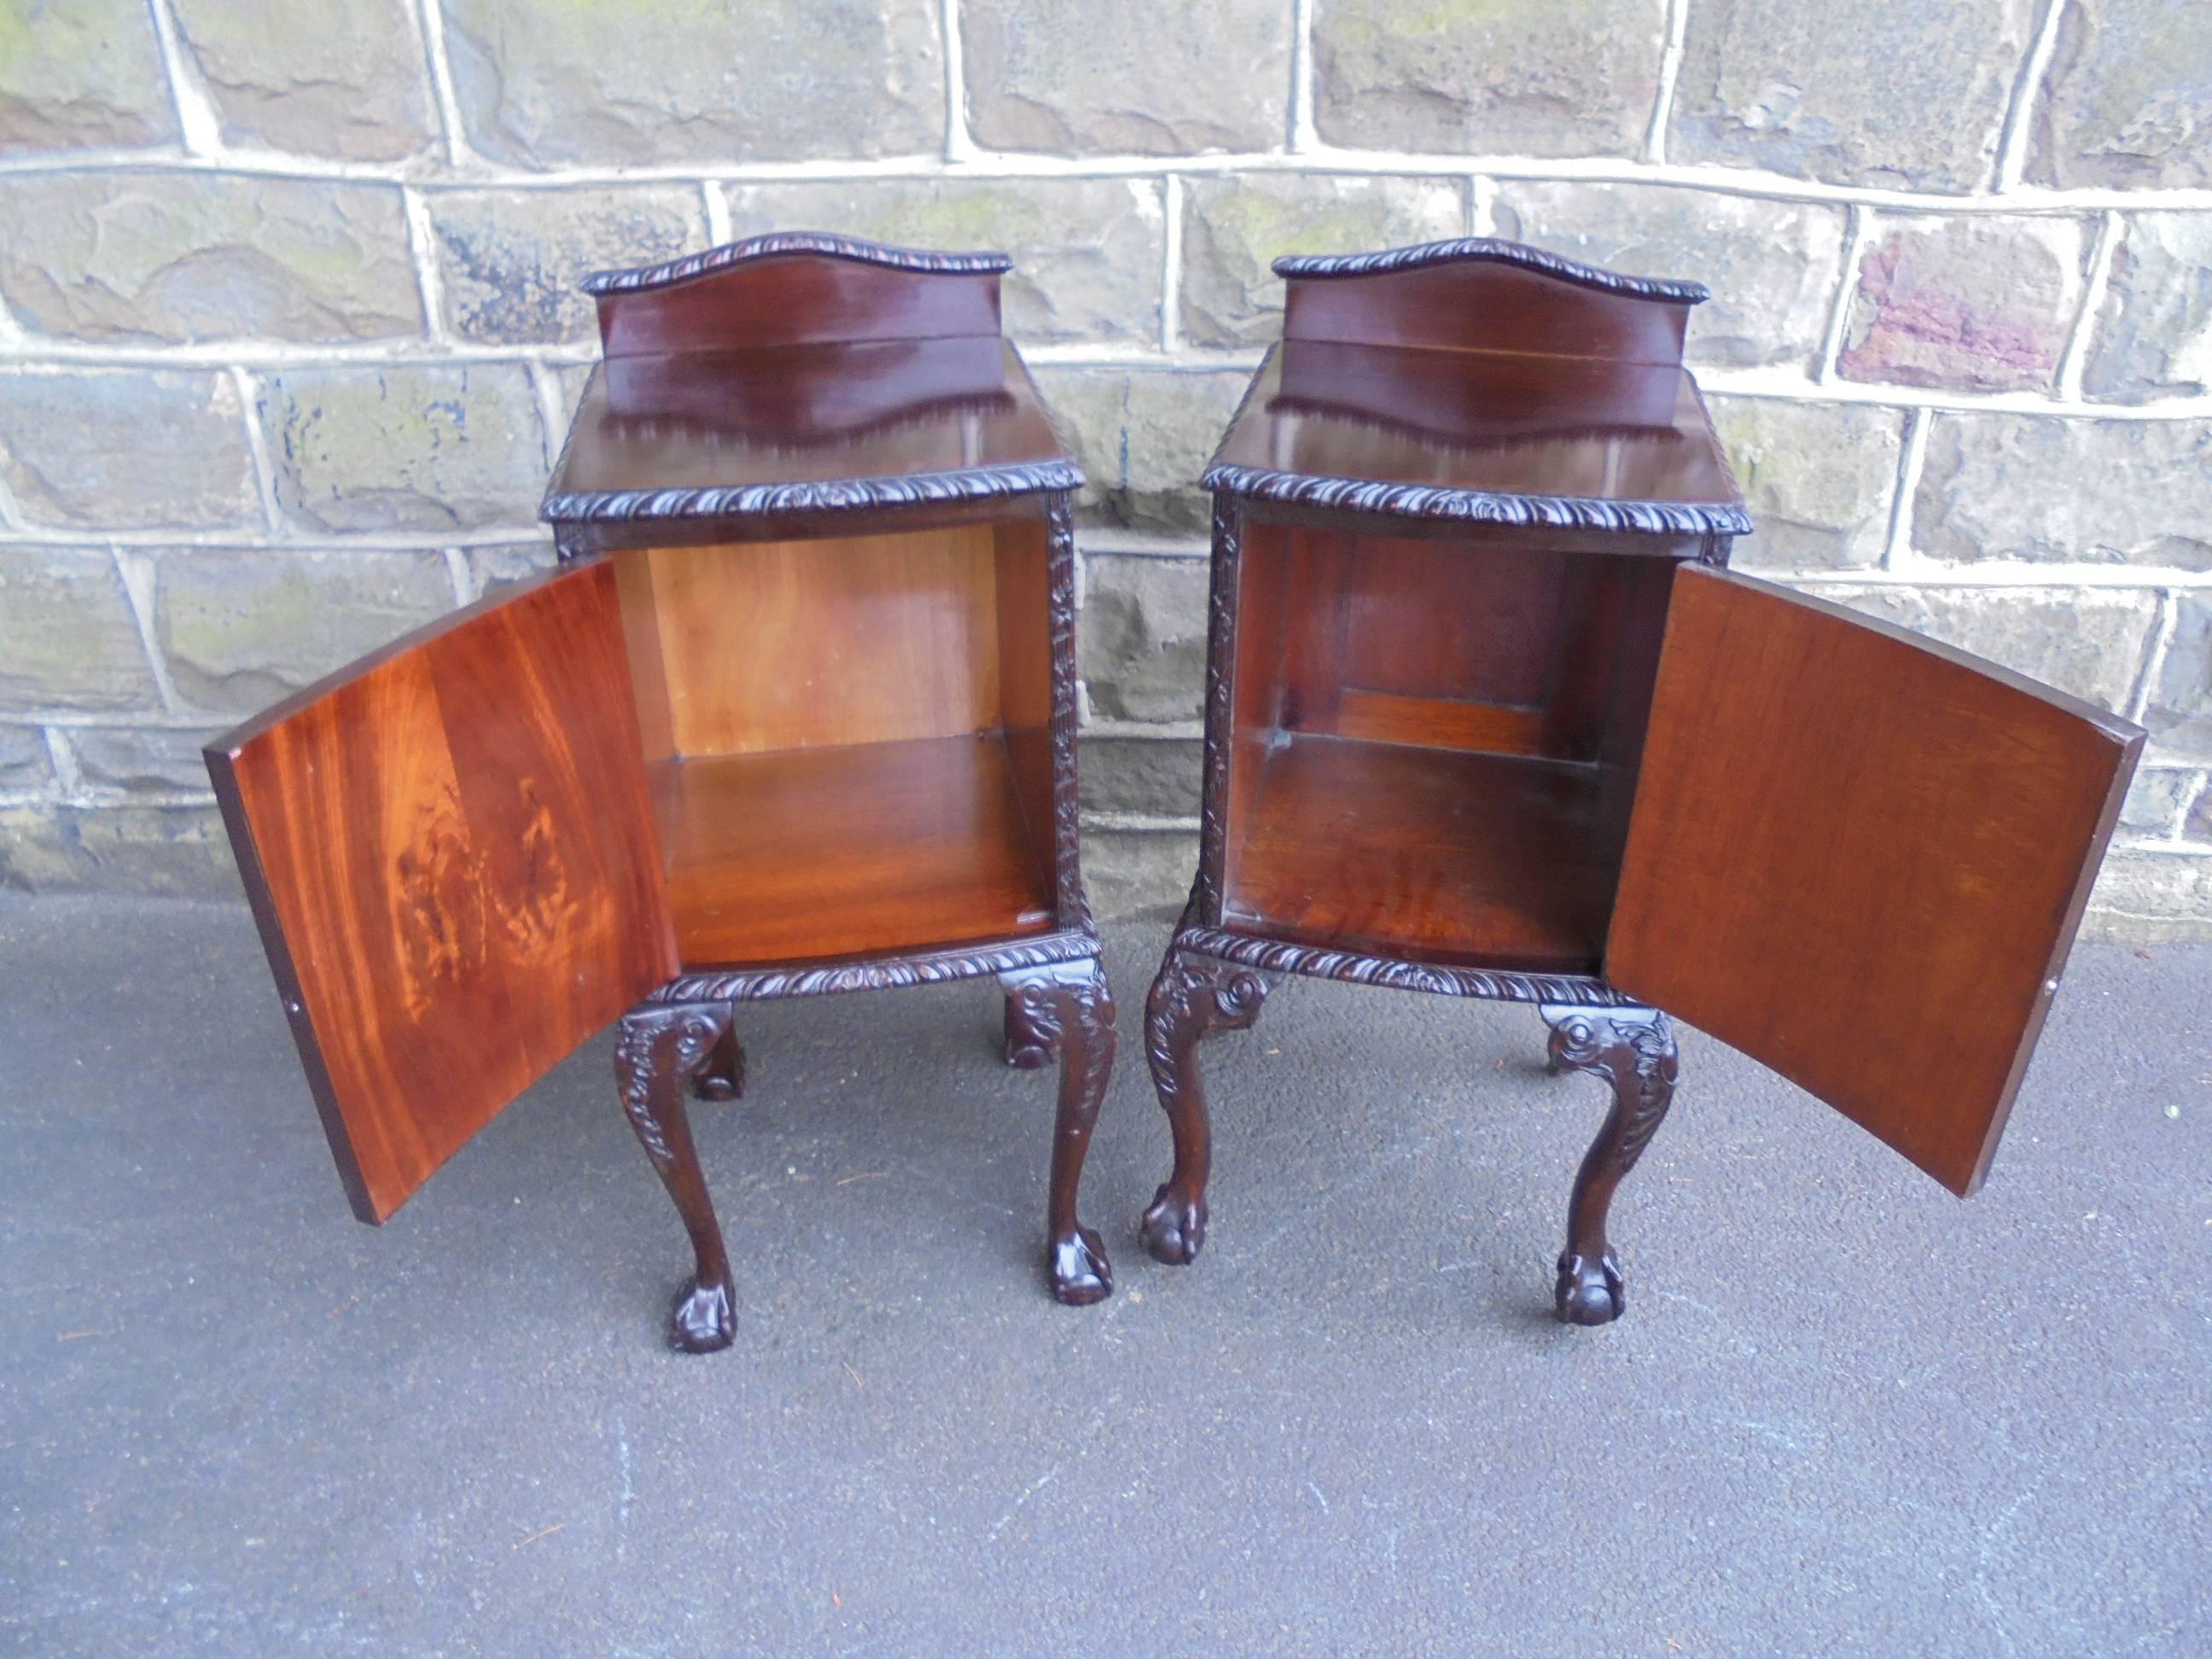 Great Britain (UK) Pair of Antique Mahogany Bedside Cabinets For Sale